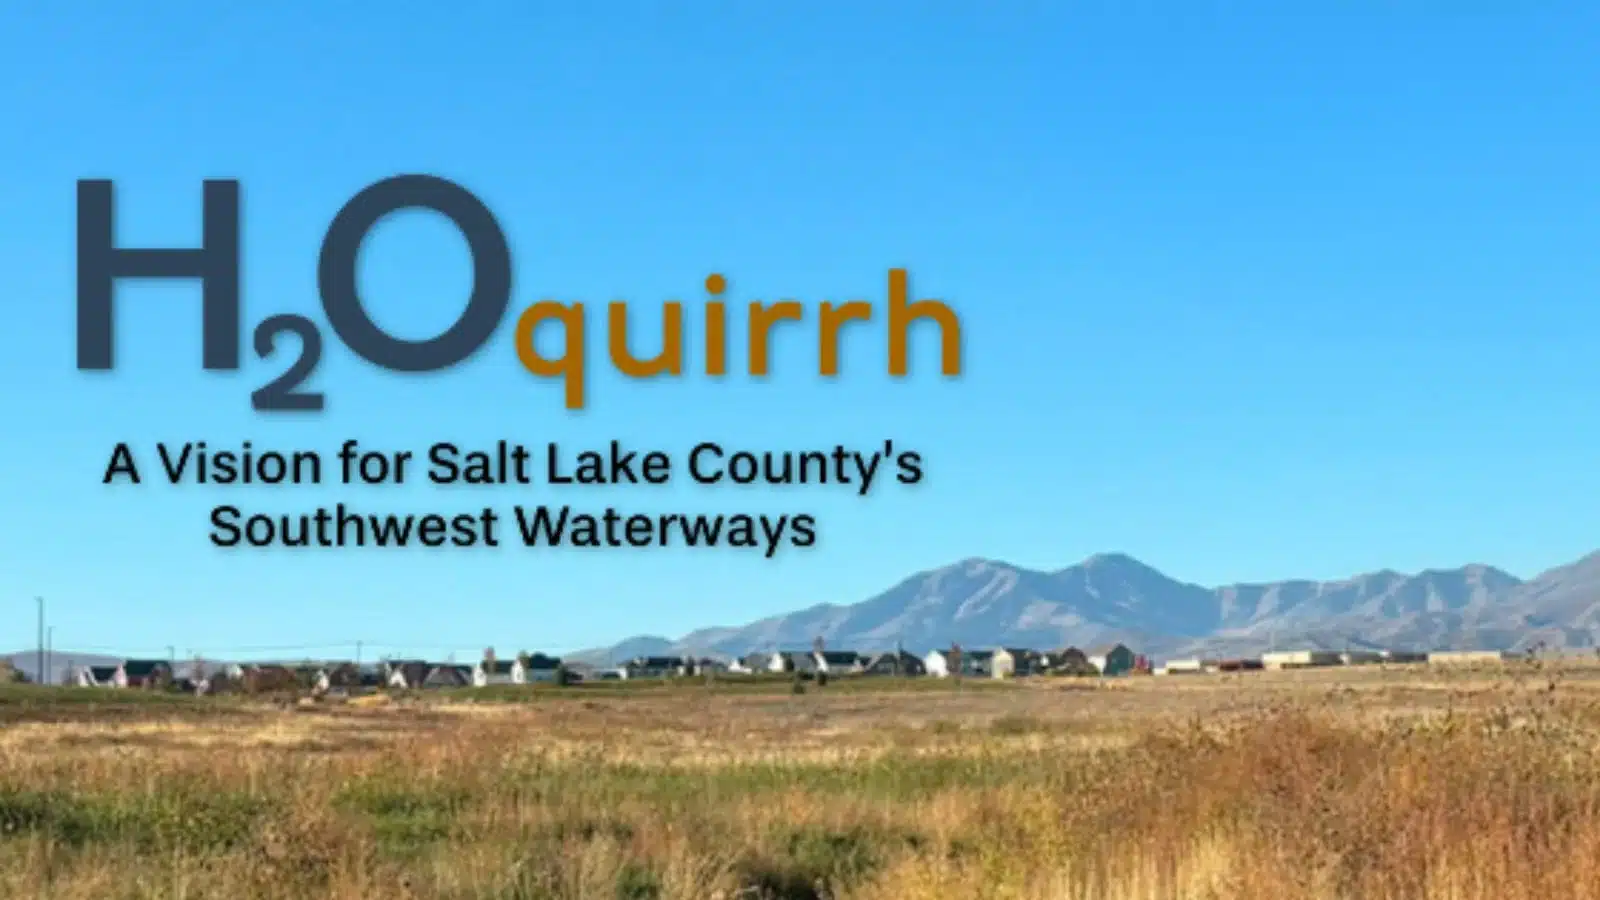 The H2Oquirrh vision plan is looking for your input!